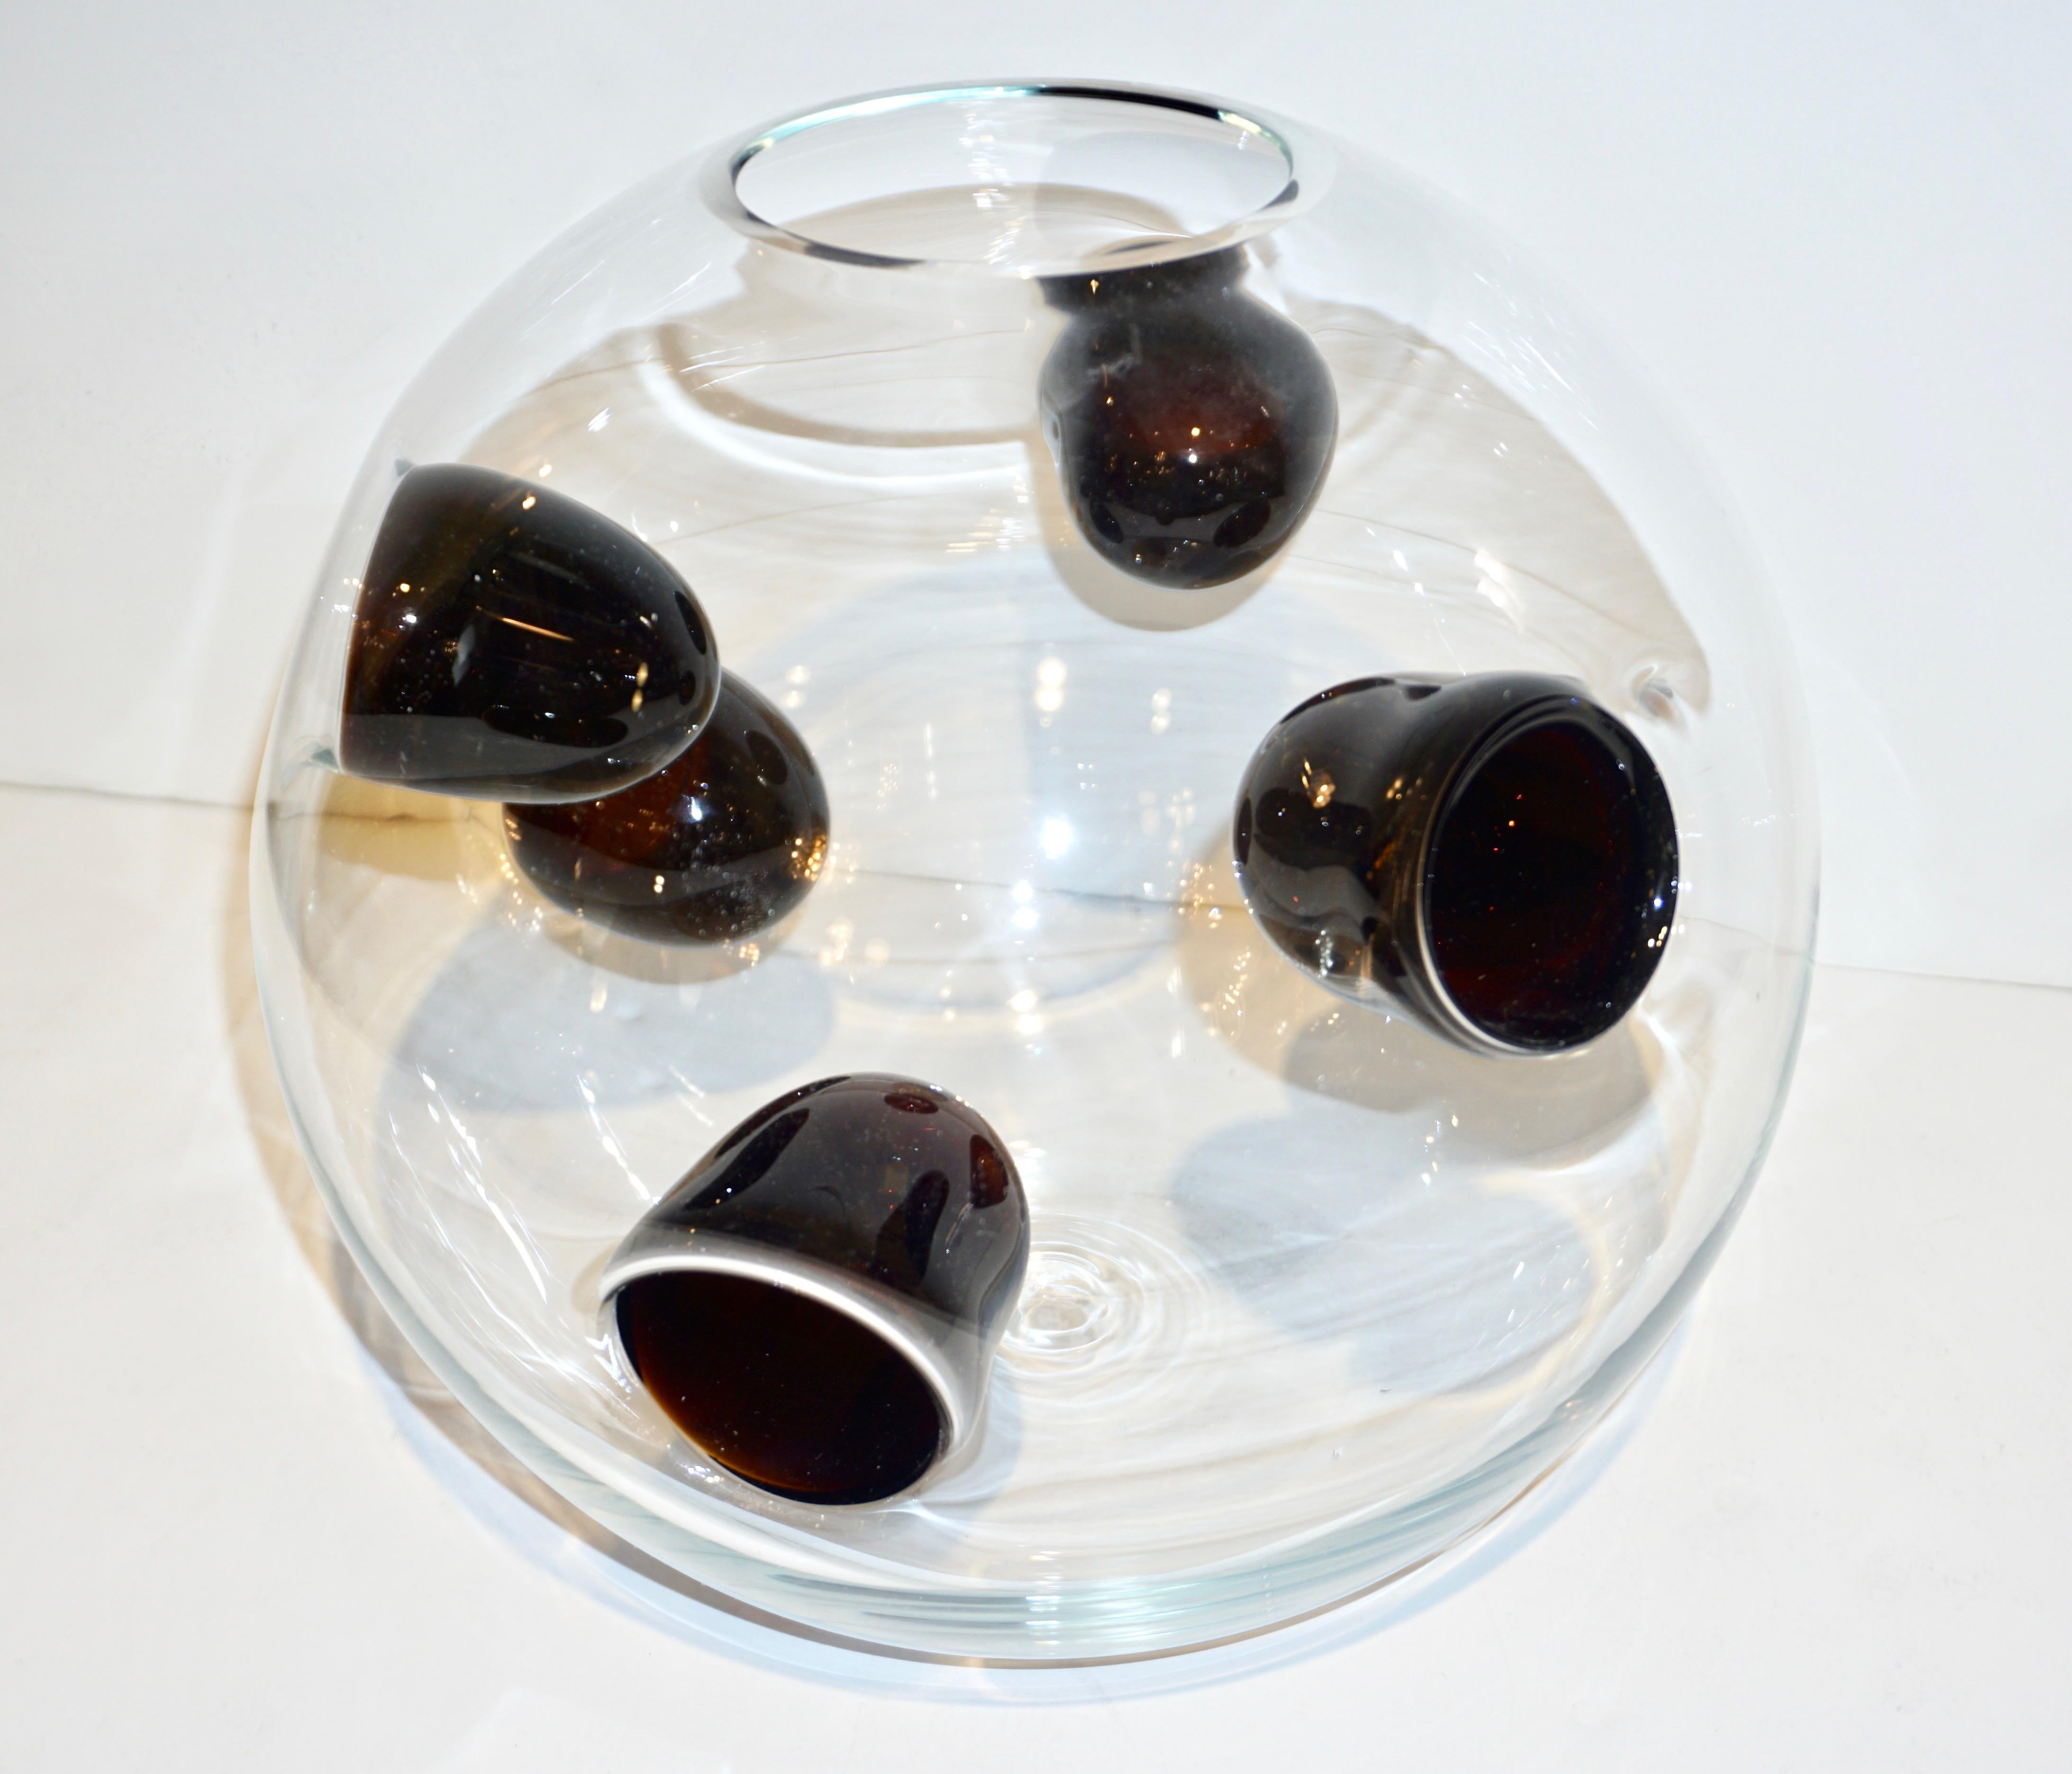 A unique blown deconstructed creation by Vistosi in Memphis Group style worked with an unusual and rare technique, the decor in the crystal clear Murano glass organic body consists of blown asymmetrical sunken bubbles in a brown red plum color, a